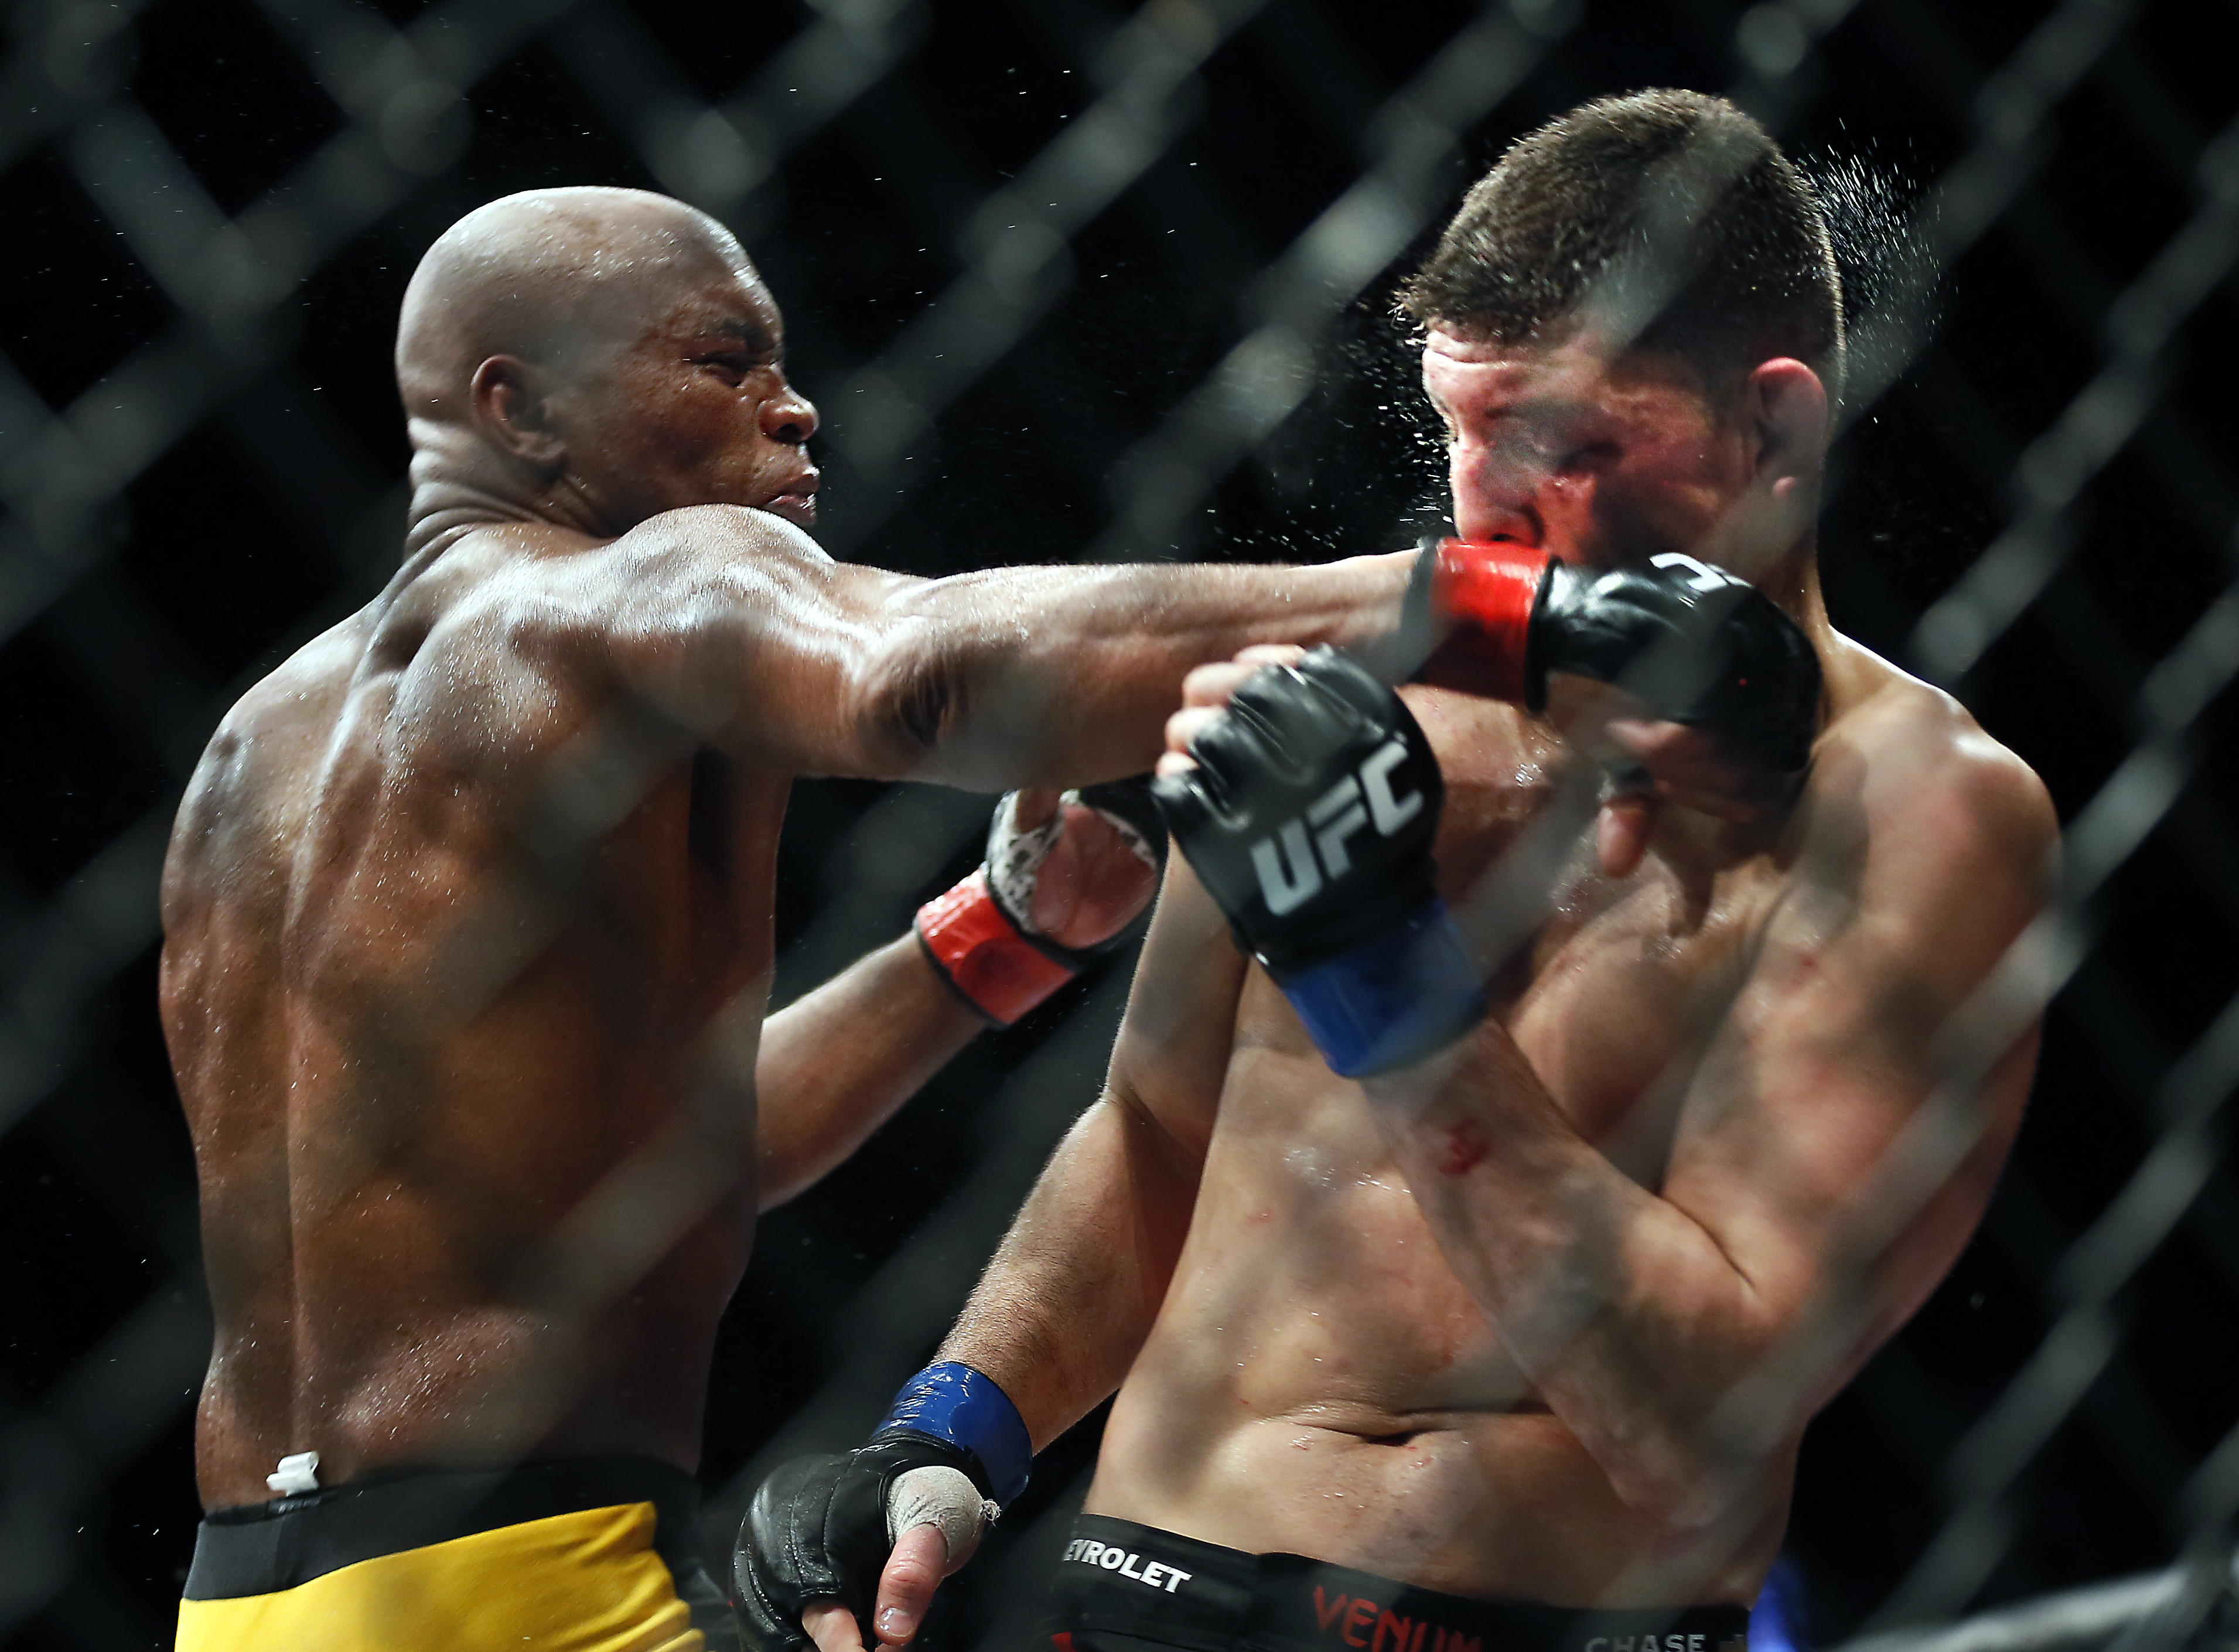 Middleweight Anderson Silva punches Nick Diaz during their fight at the MGM Grand Garden Arena in Las Vegas on Saturday, Jan. 31, 2015 (L.E. Baskow—AP)